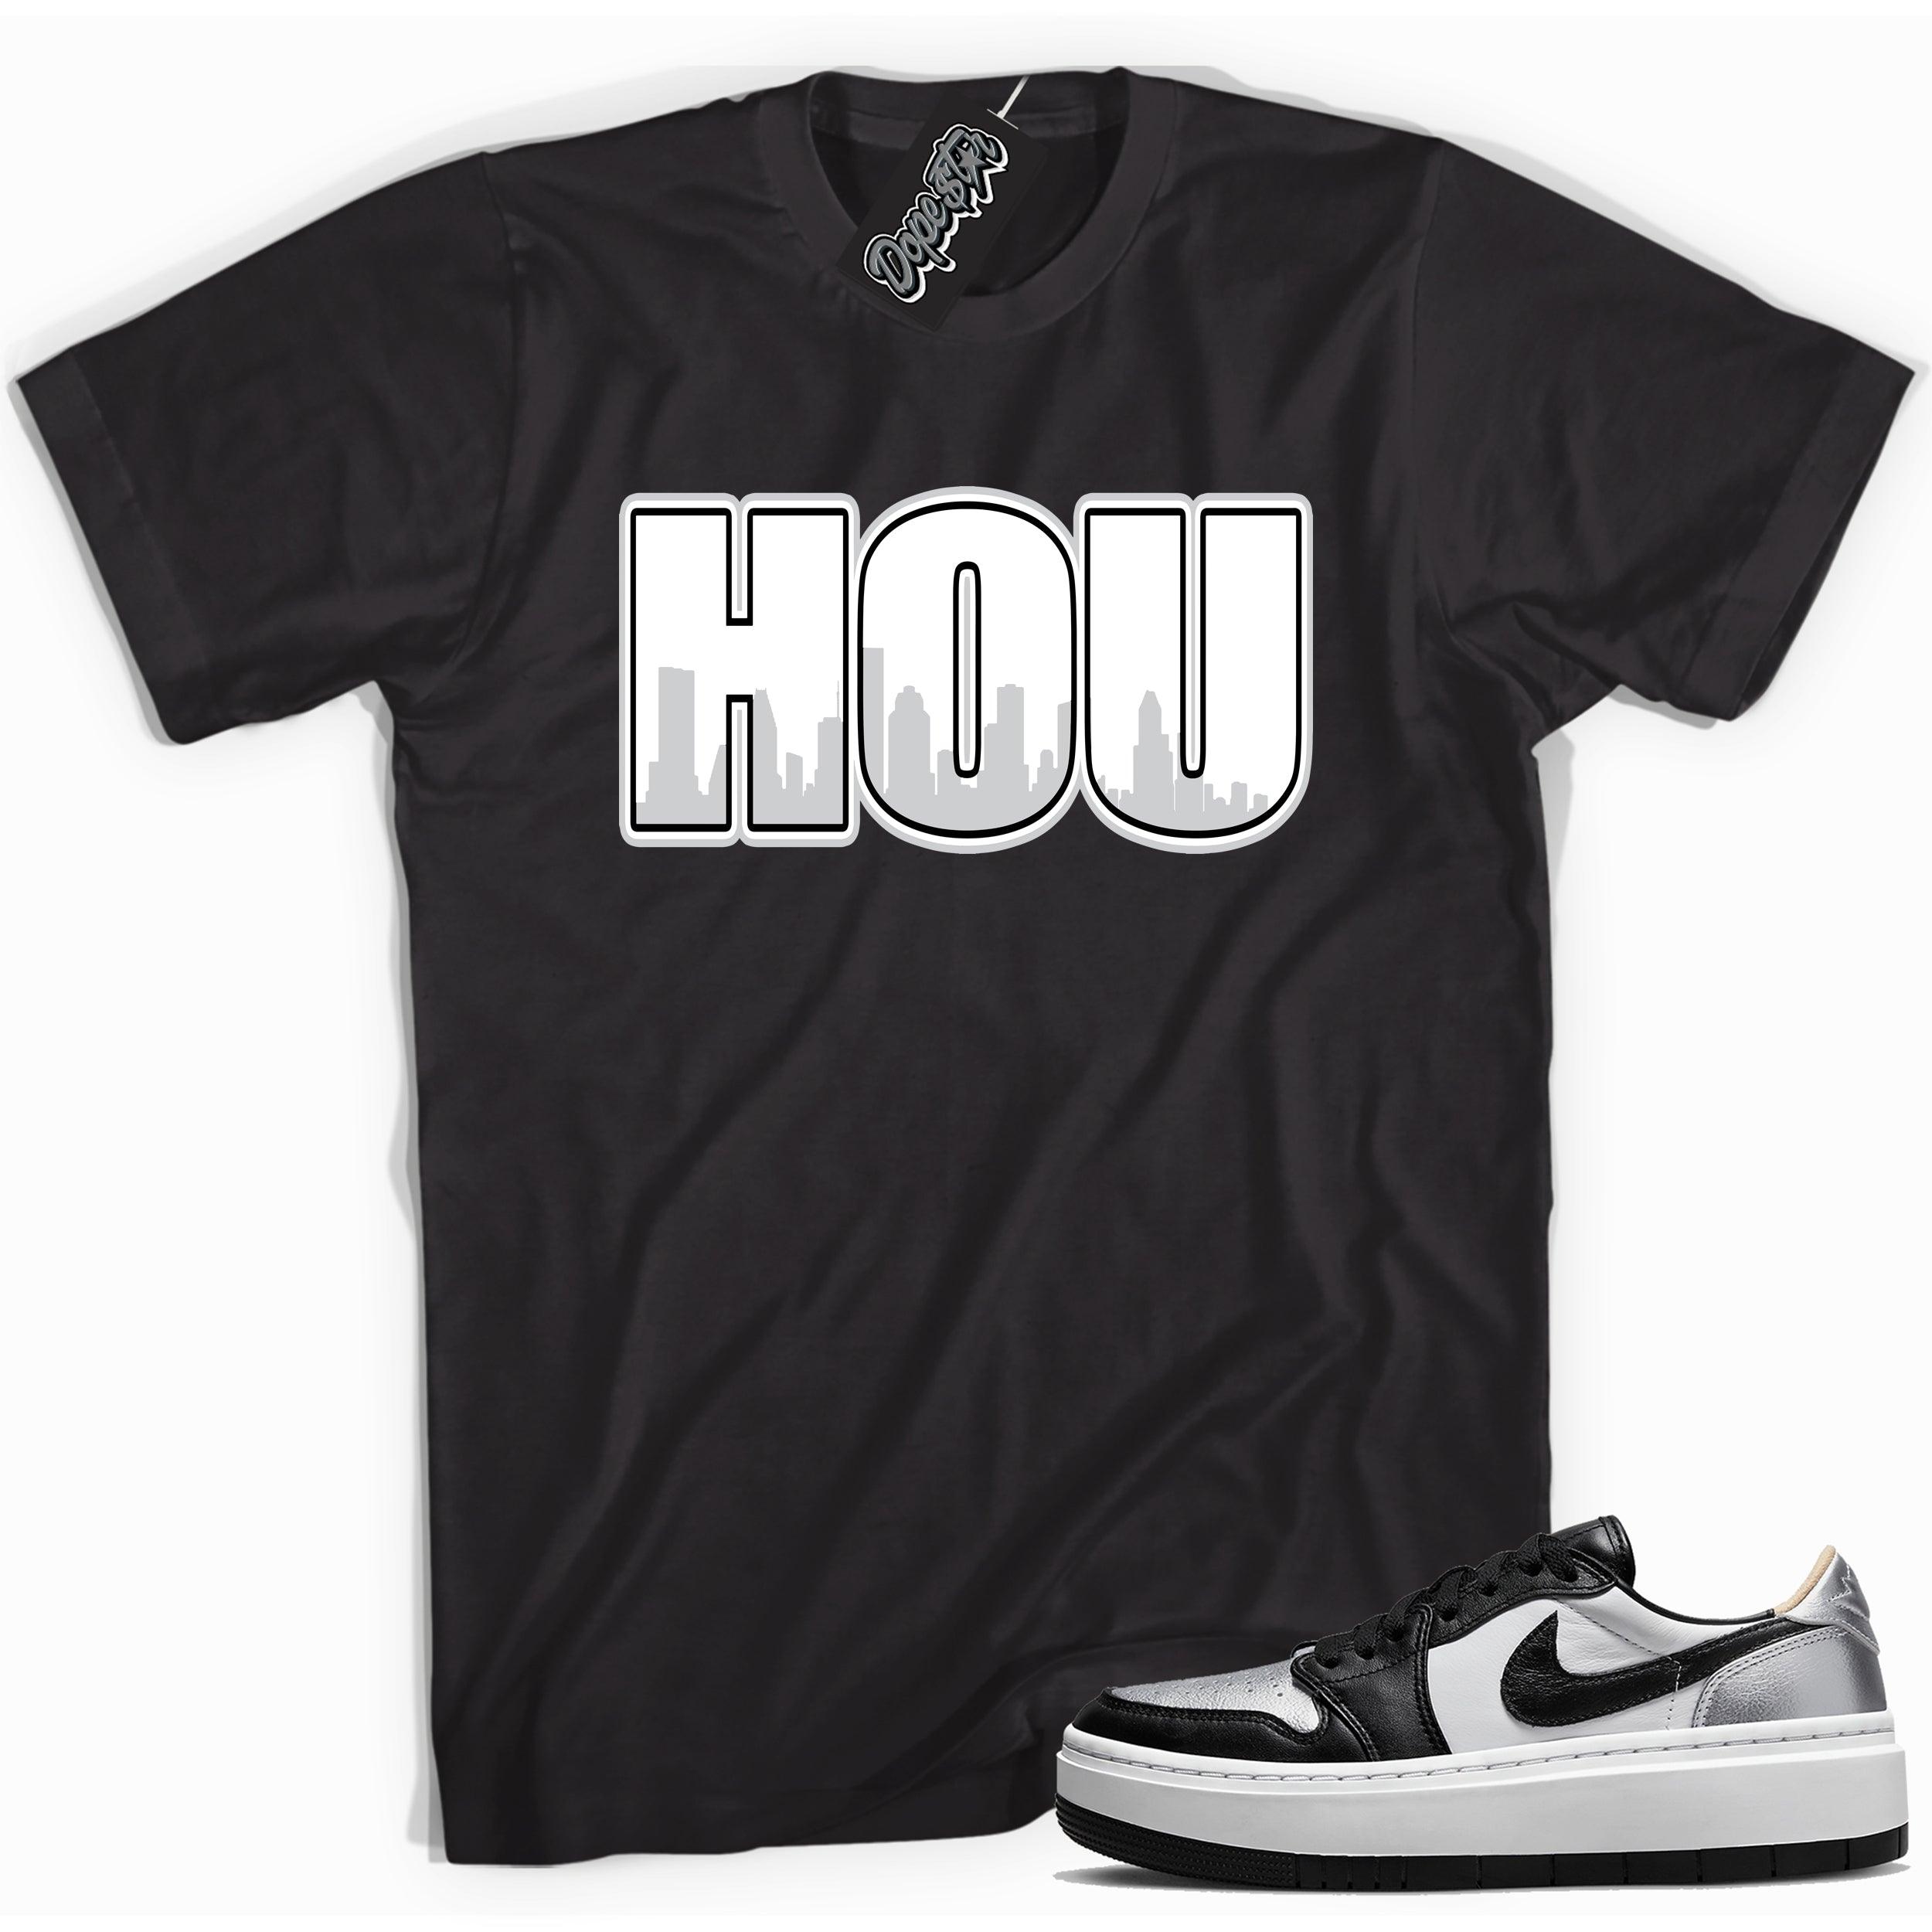 Cool black graphic tee with 'Houston HOU' print, that perfectly matches Air Jordan 1 Elevate Low SE Silver Toe sneakers.